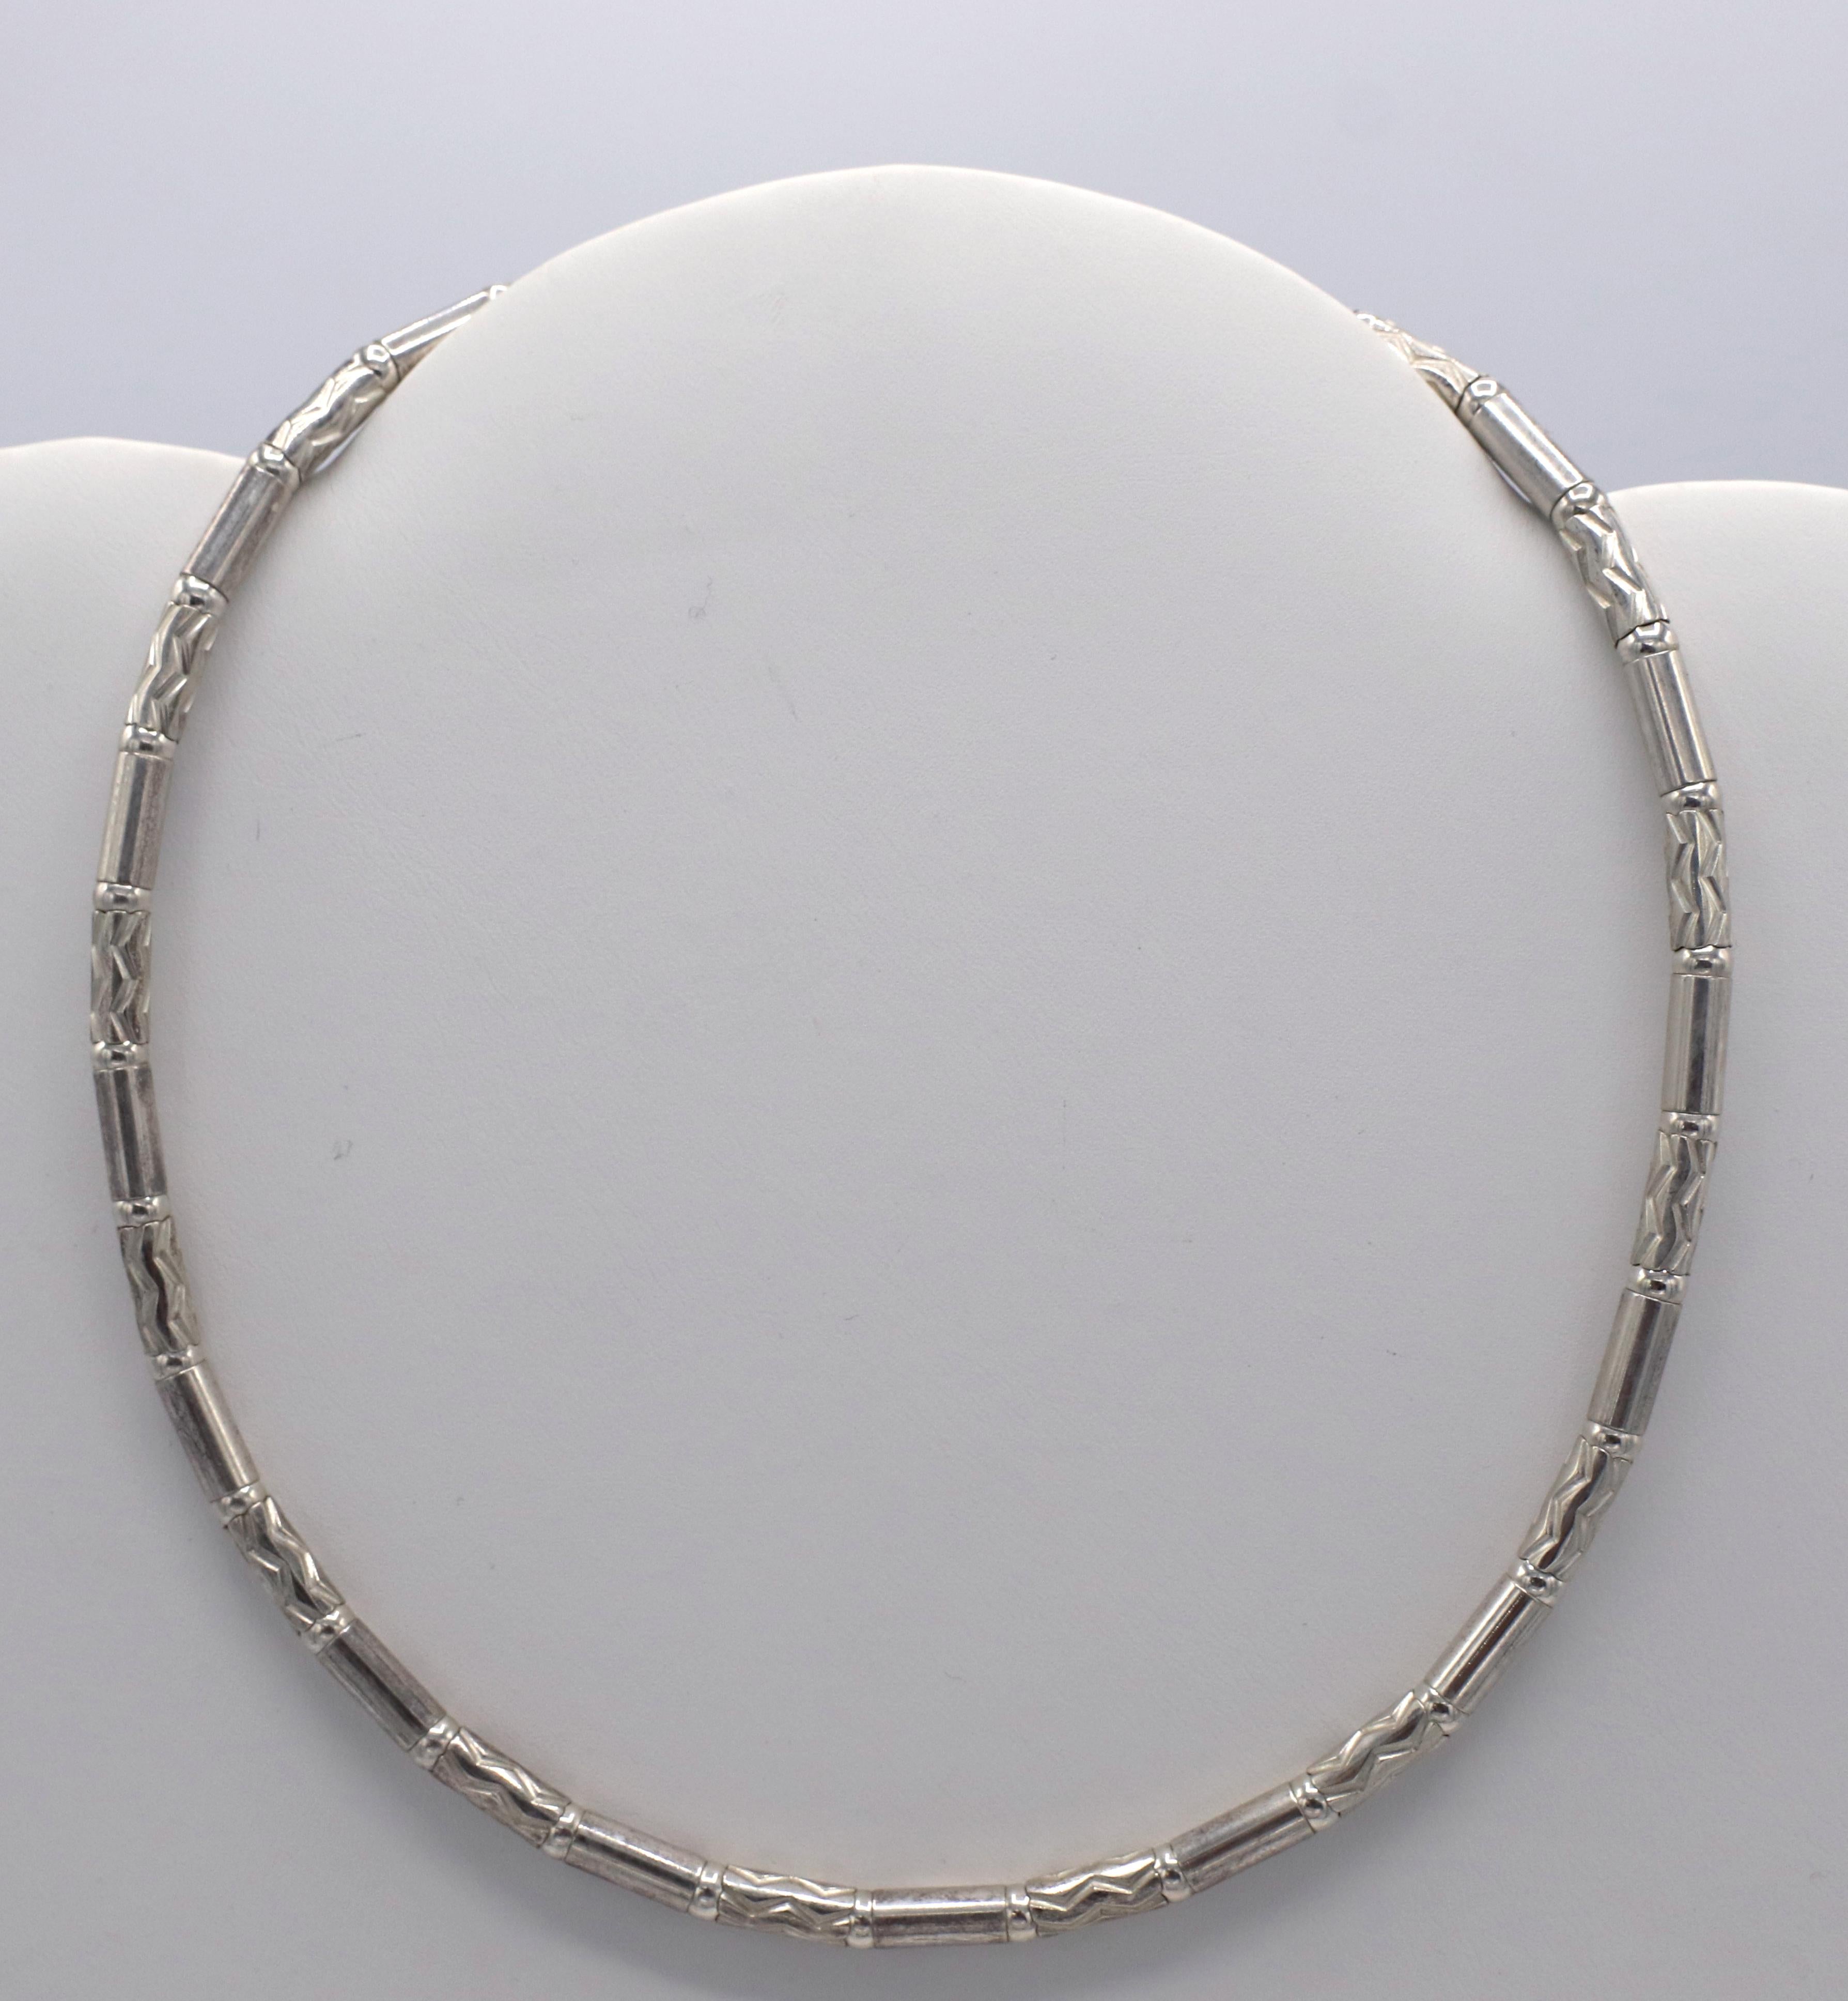 Tiffany & Co. Sterling Silver Aztec Etched Zig Zag Necklace 
Metal: Sterling Silver 925
Weight: 43 grams
Length: 16 inches
Width: 4.4mm
Signed: Tiffany & Co. Germany 925 
